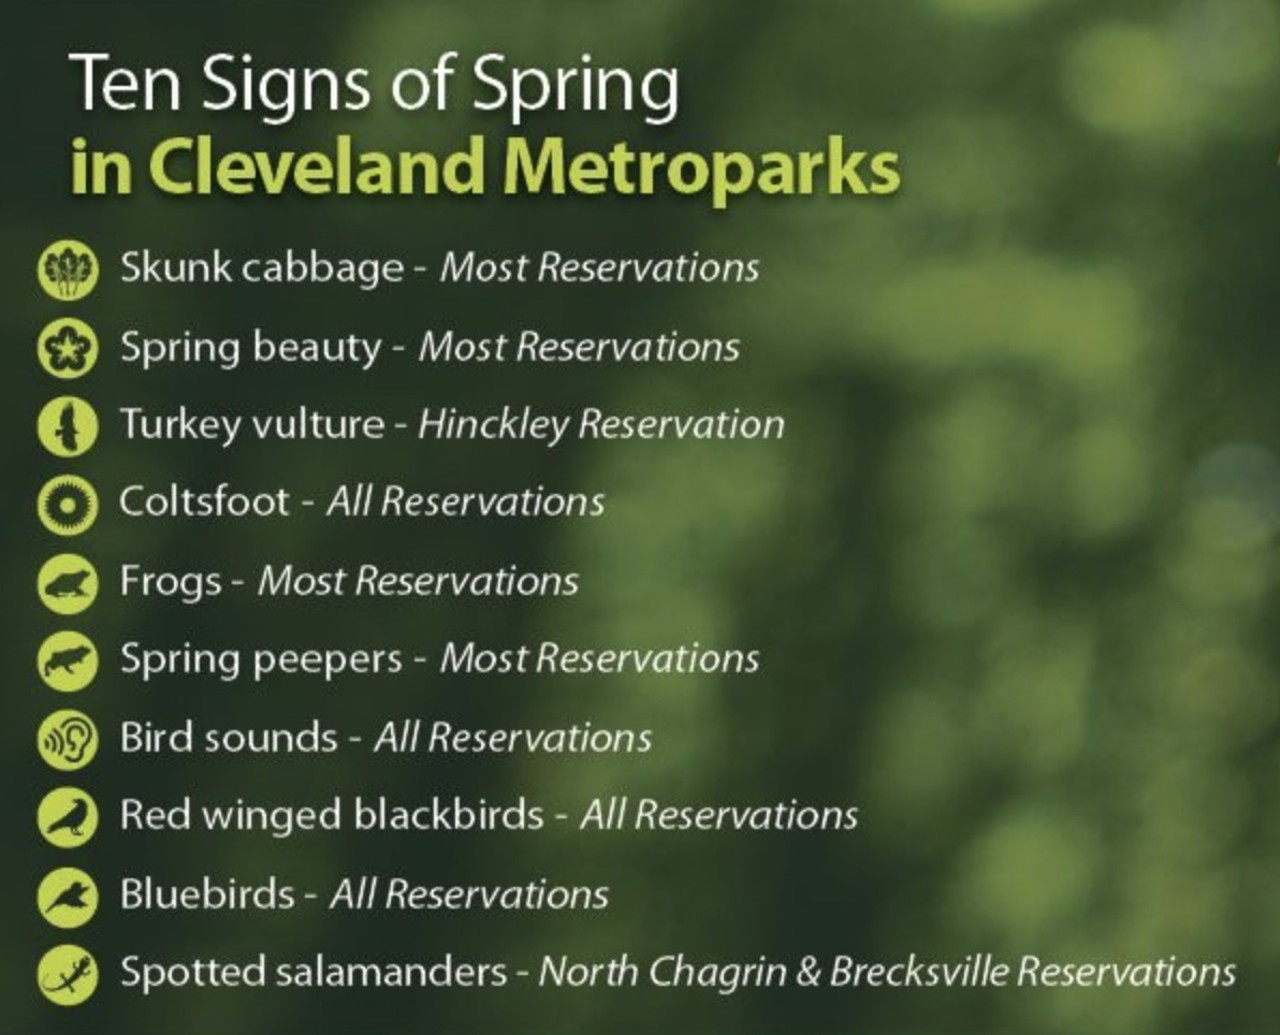 Actual Nature Stuff
Beyond the birds, the signs of spring are all around the Metroparks if you know what to look for and thankfully the Metropark’s is here for you.